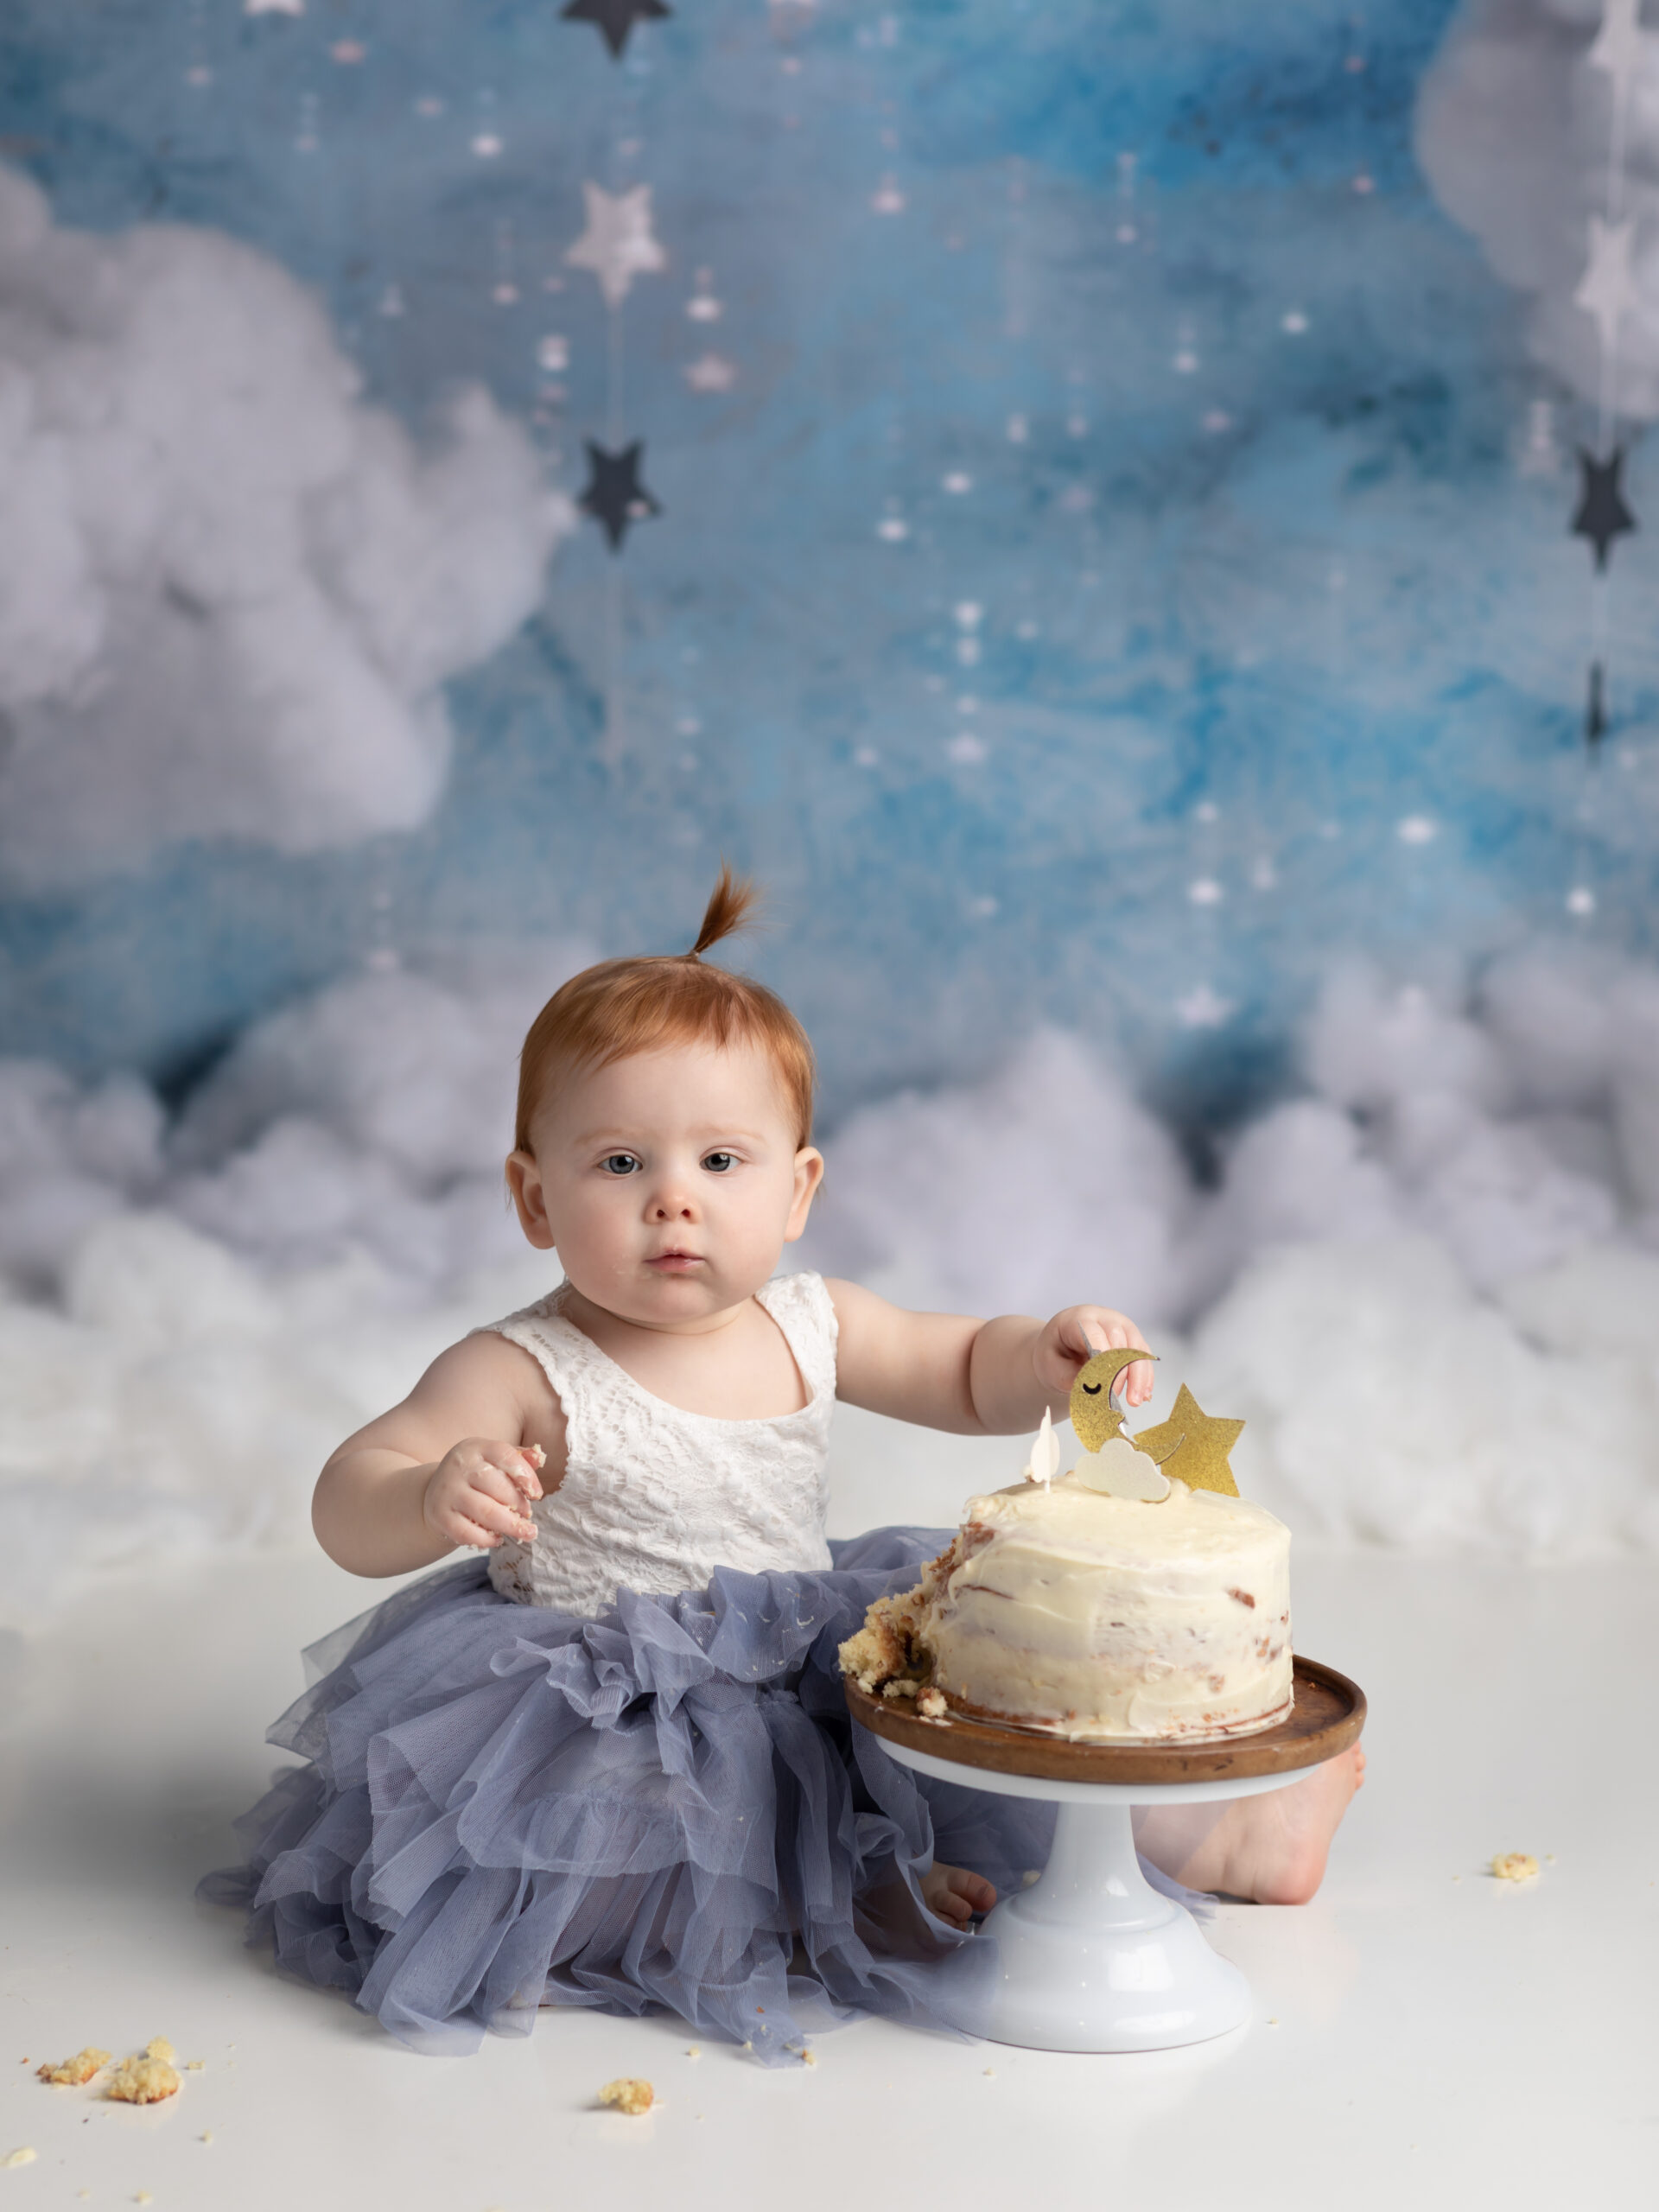 one year old girl eating cake for photoshoot